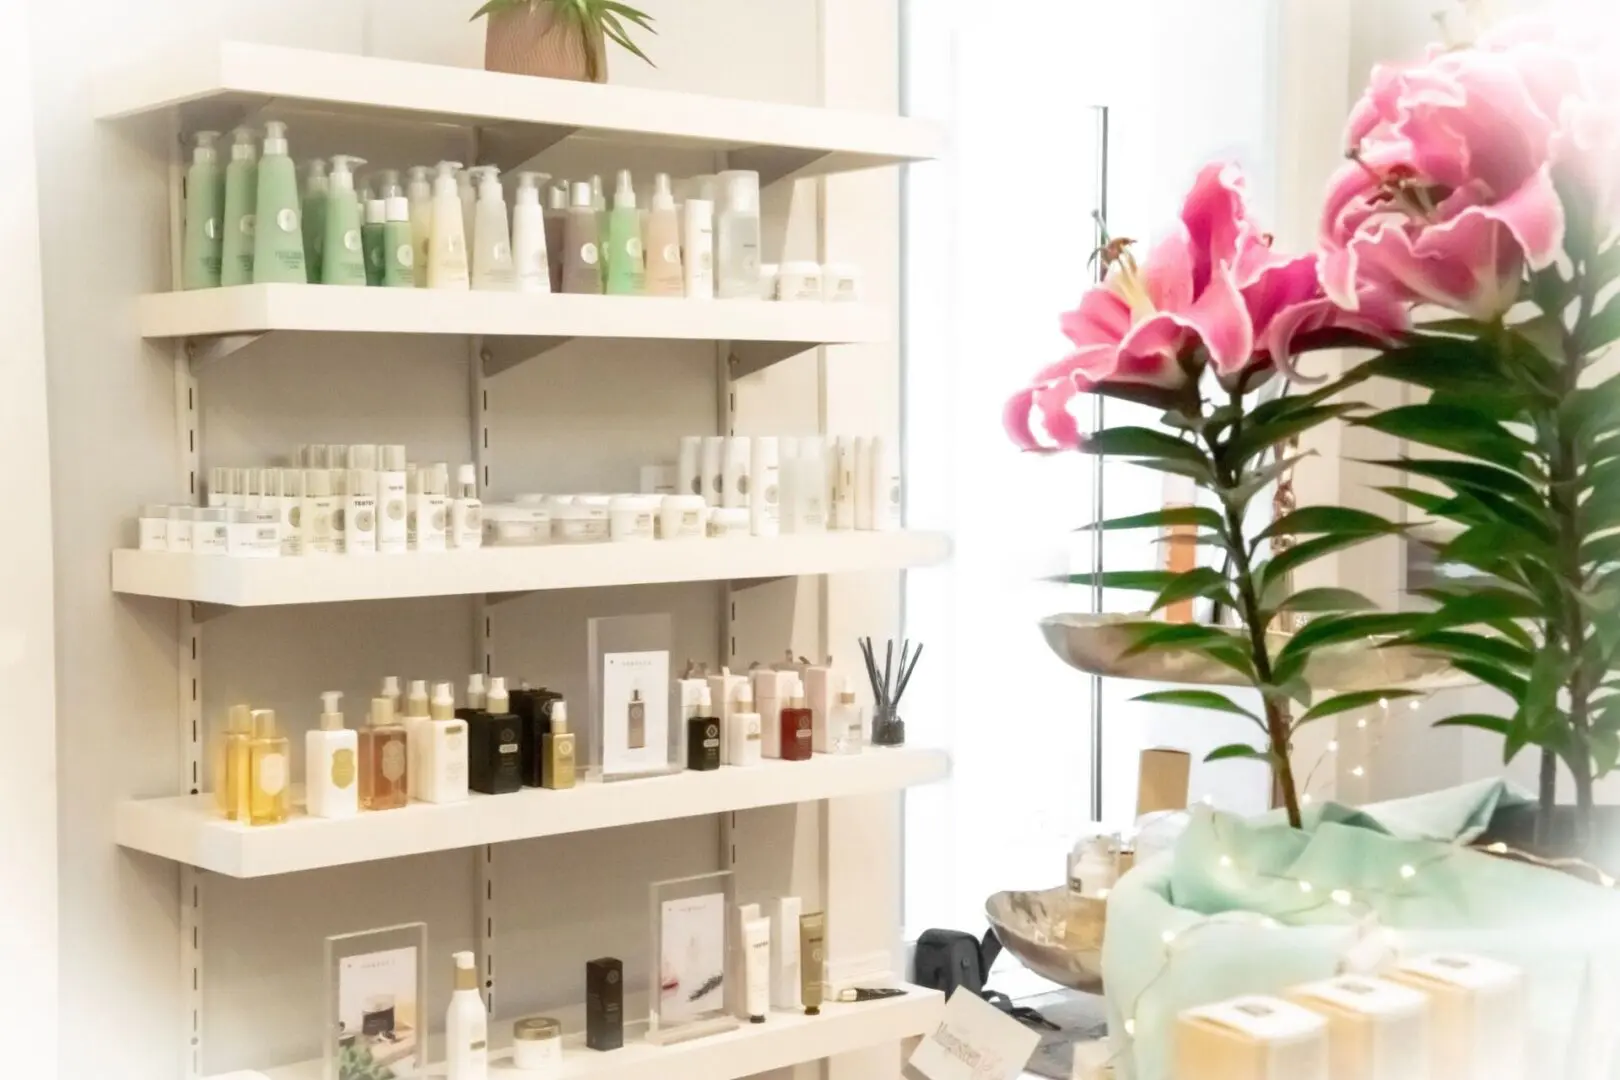 A room filled with shelves of beauty products.